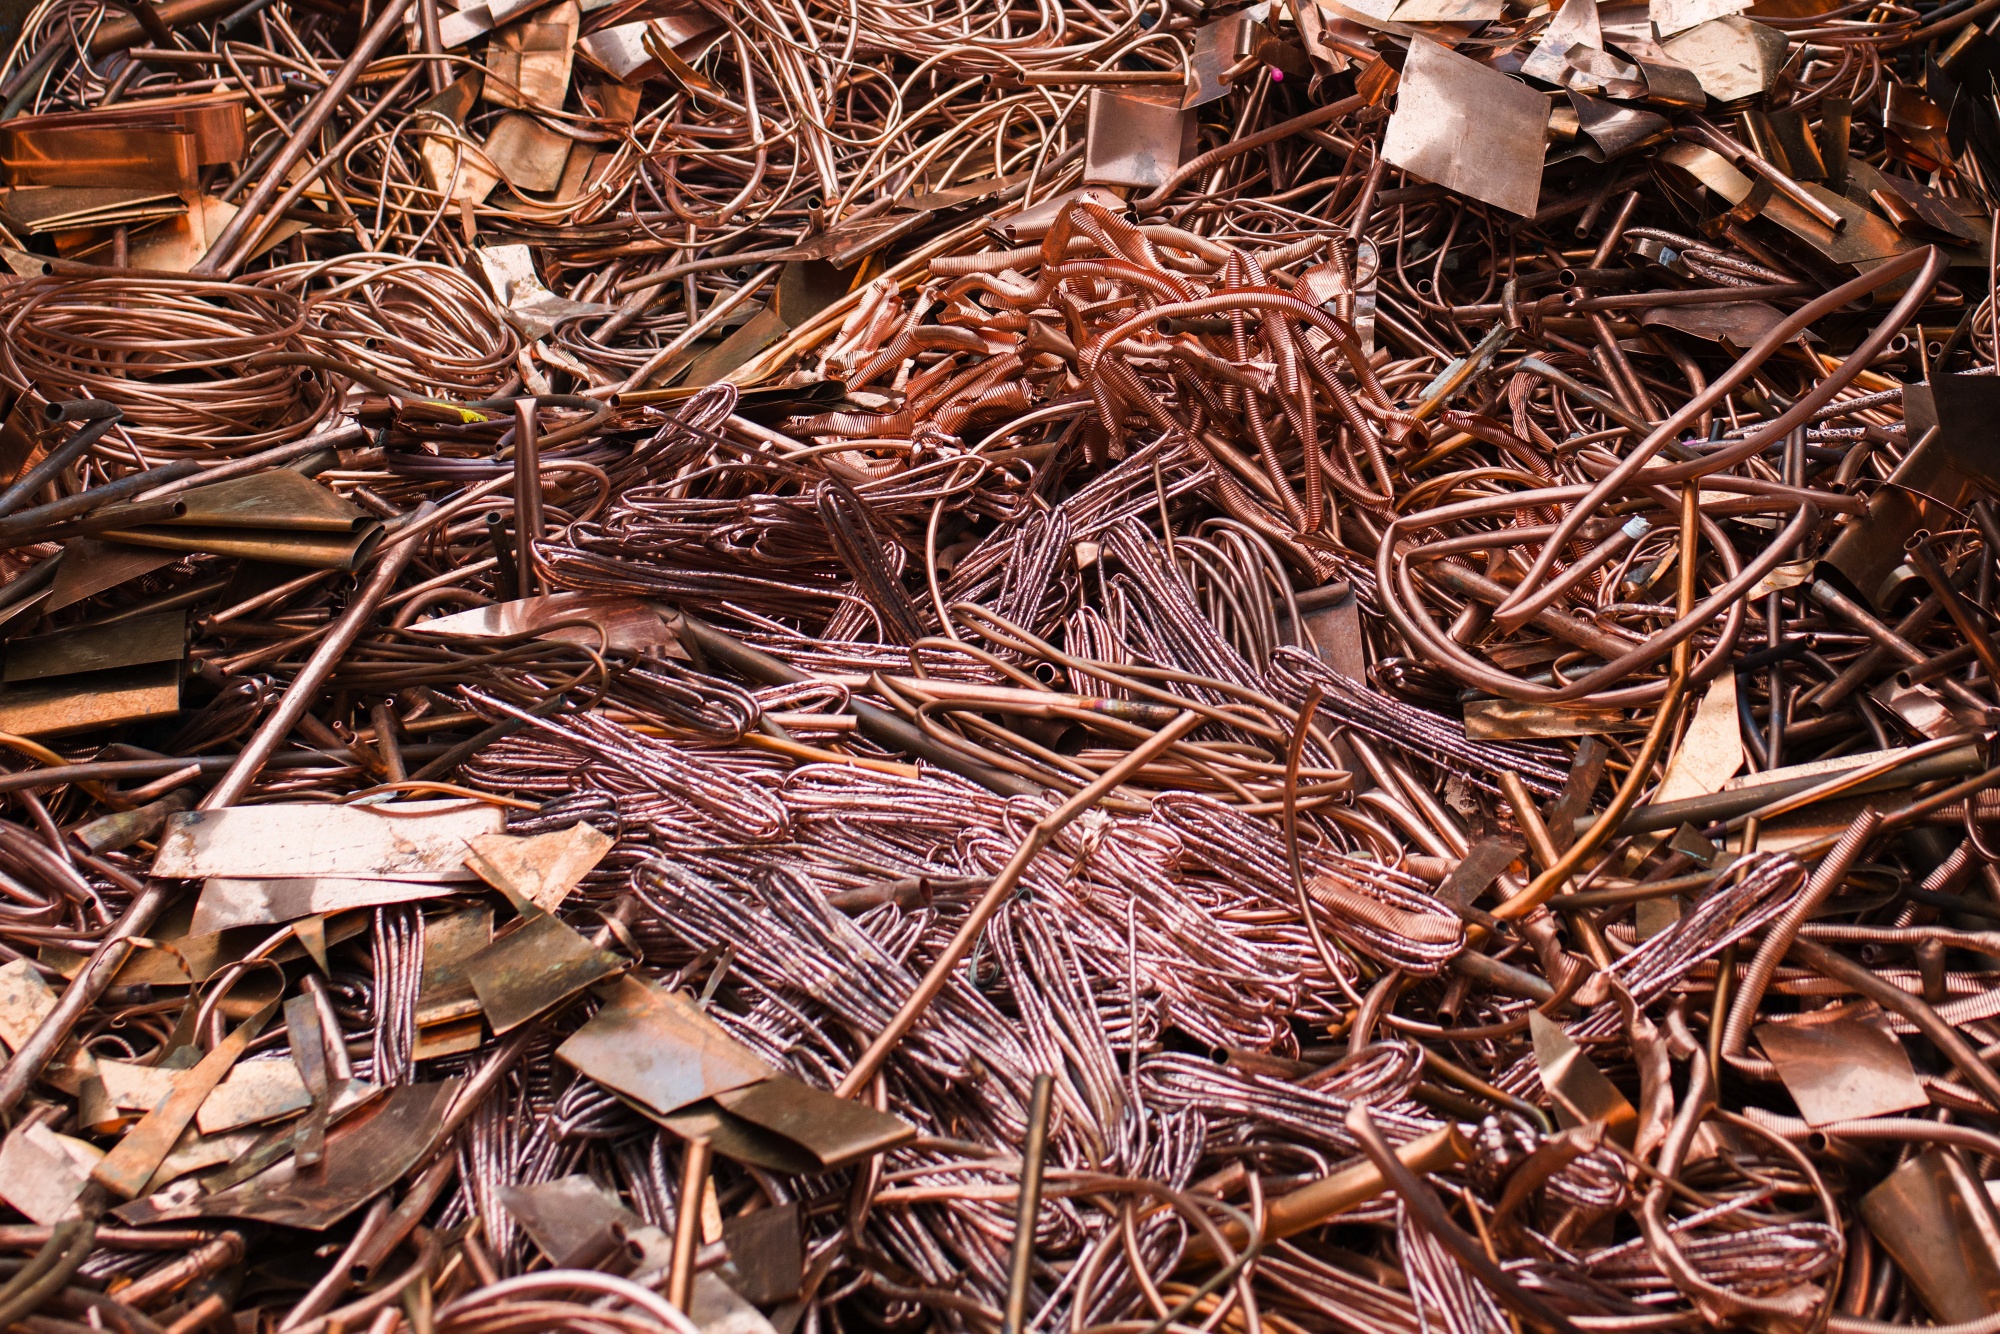 Pieces of copper cable and pipework at a scrap and metals recycling yard in Paris, France.